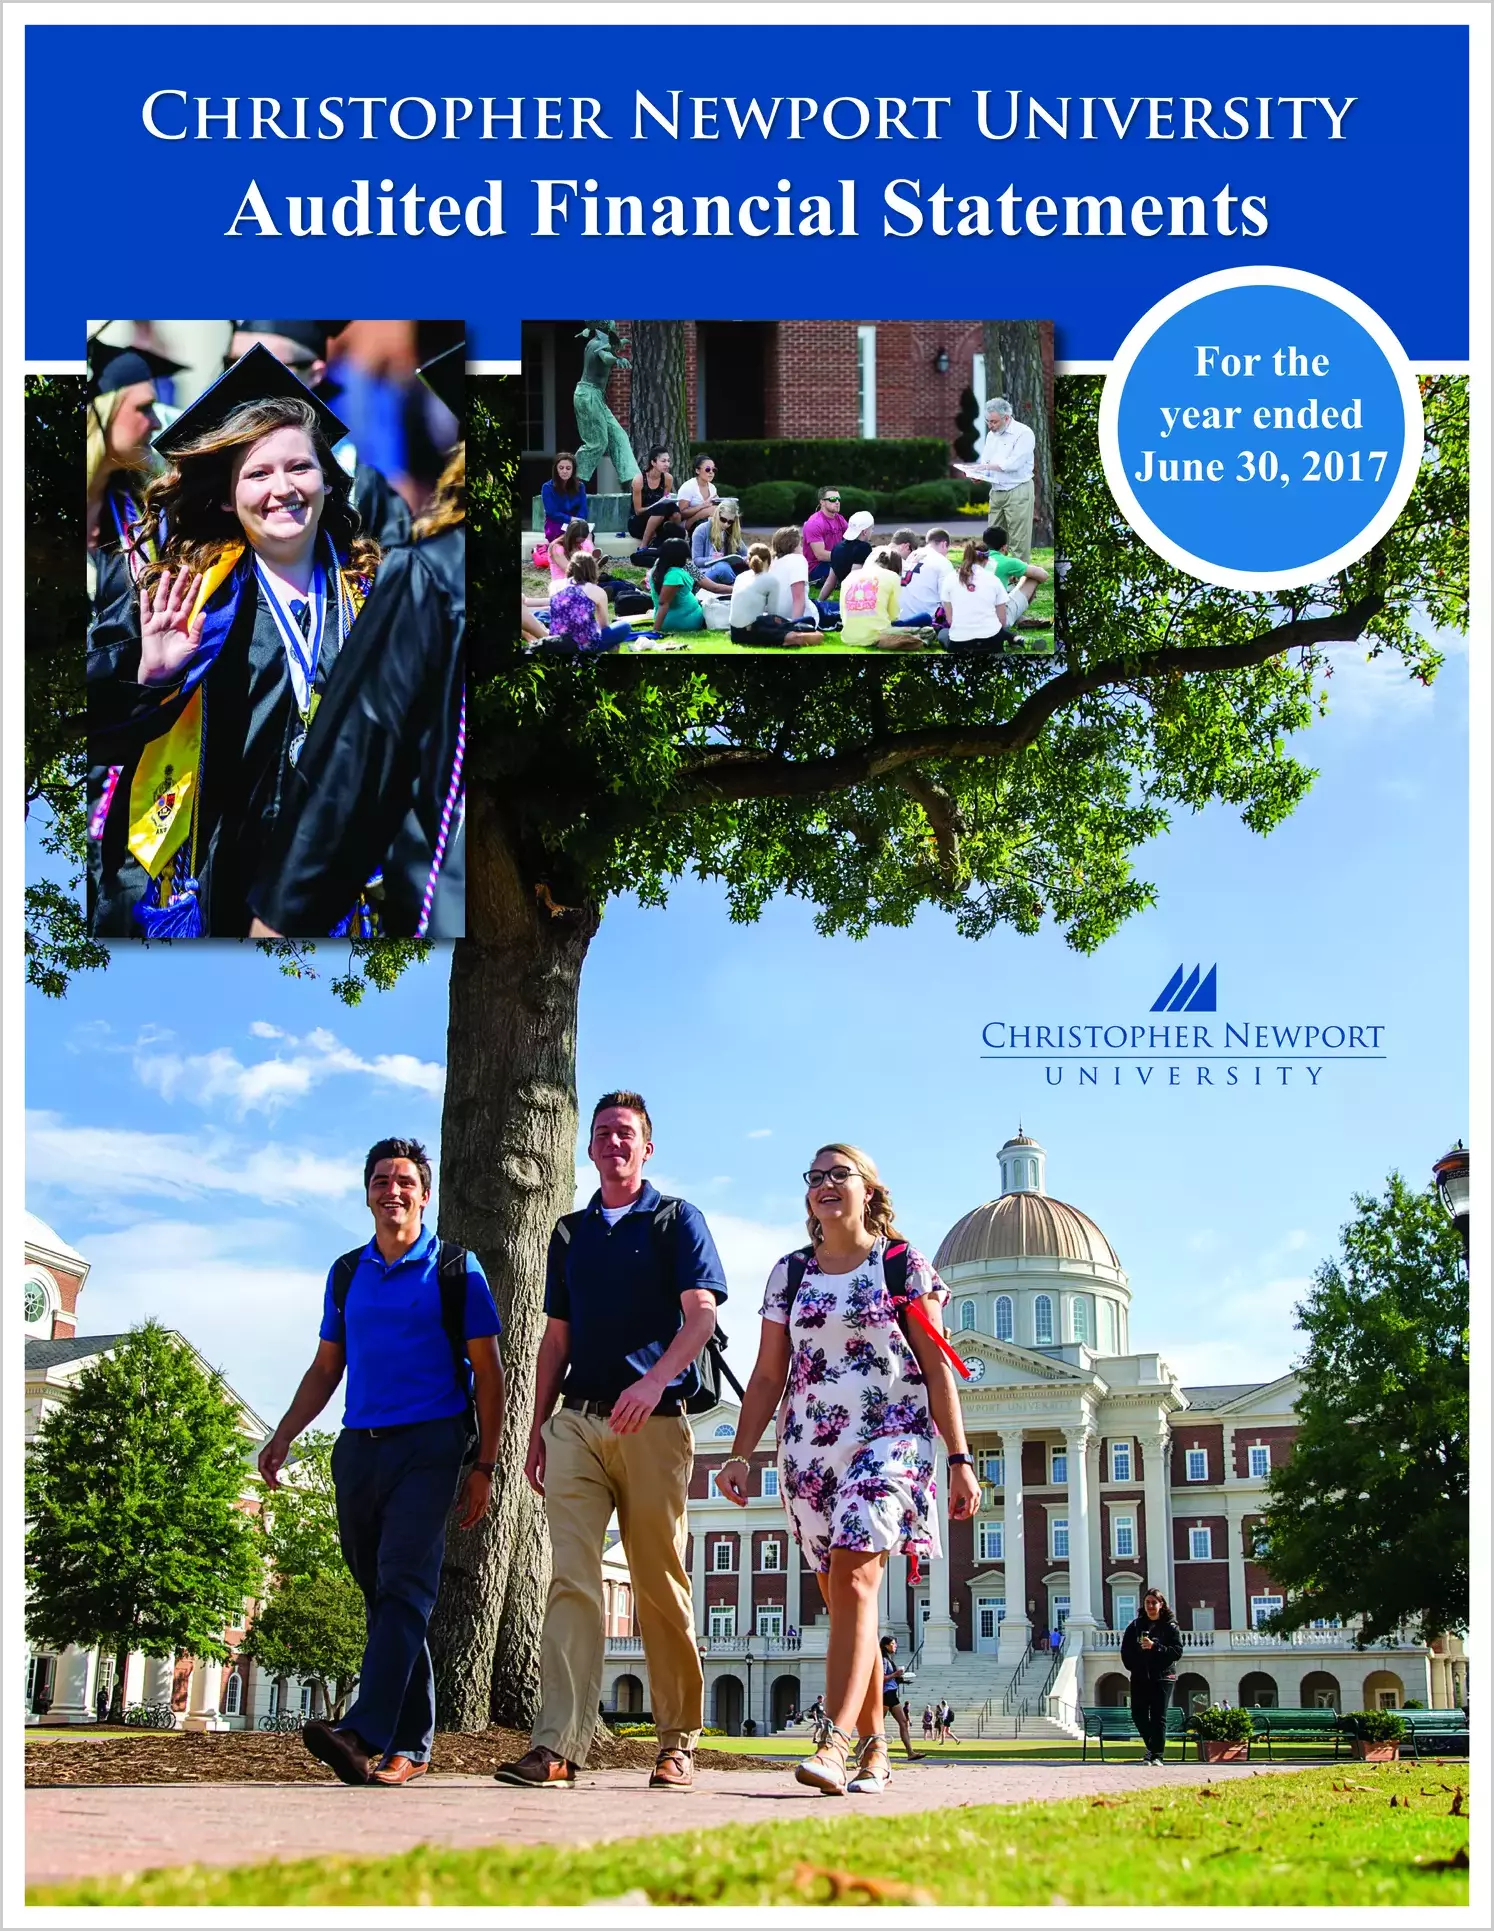 Christopher Newport University Financial Statements for the year ended June 30, 2017